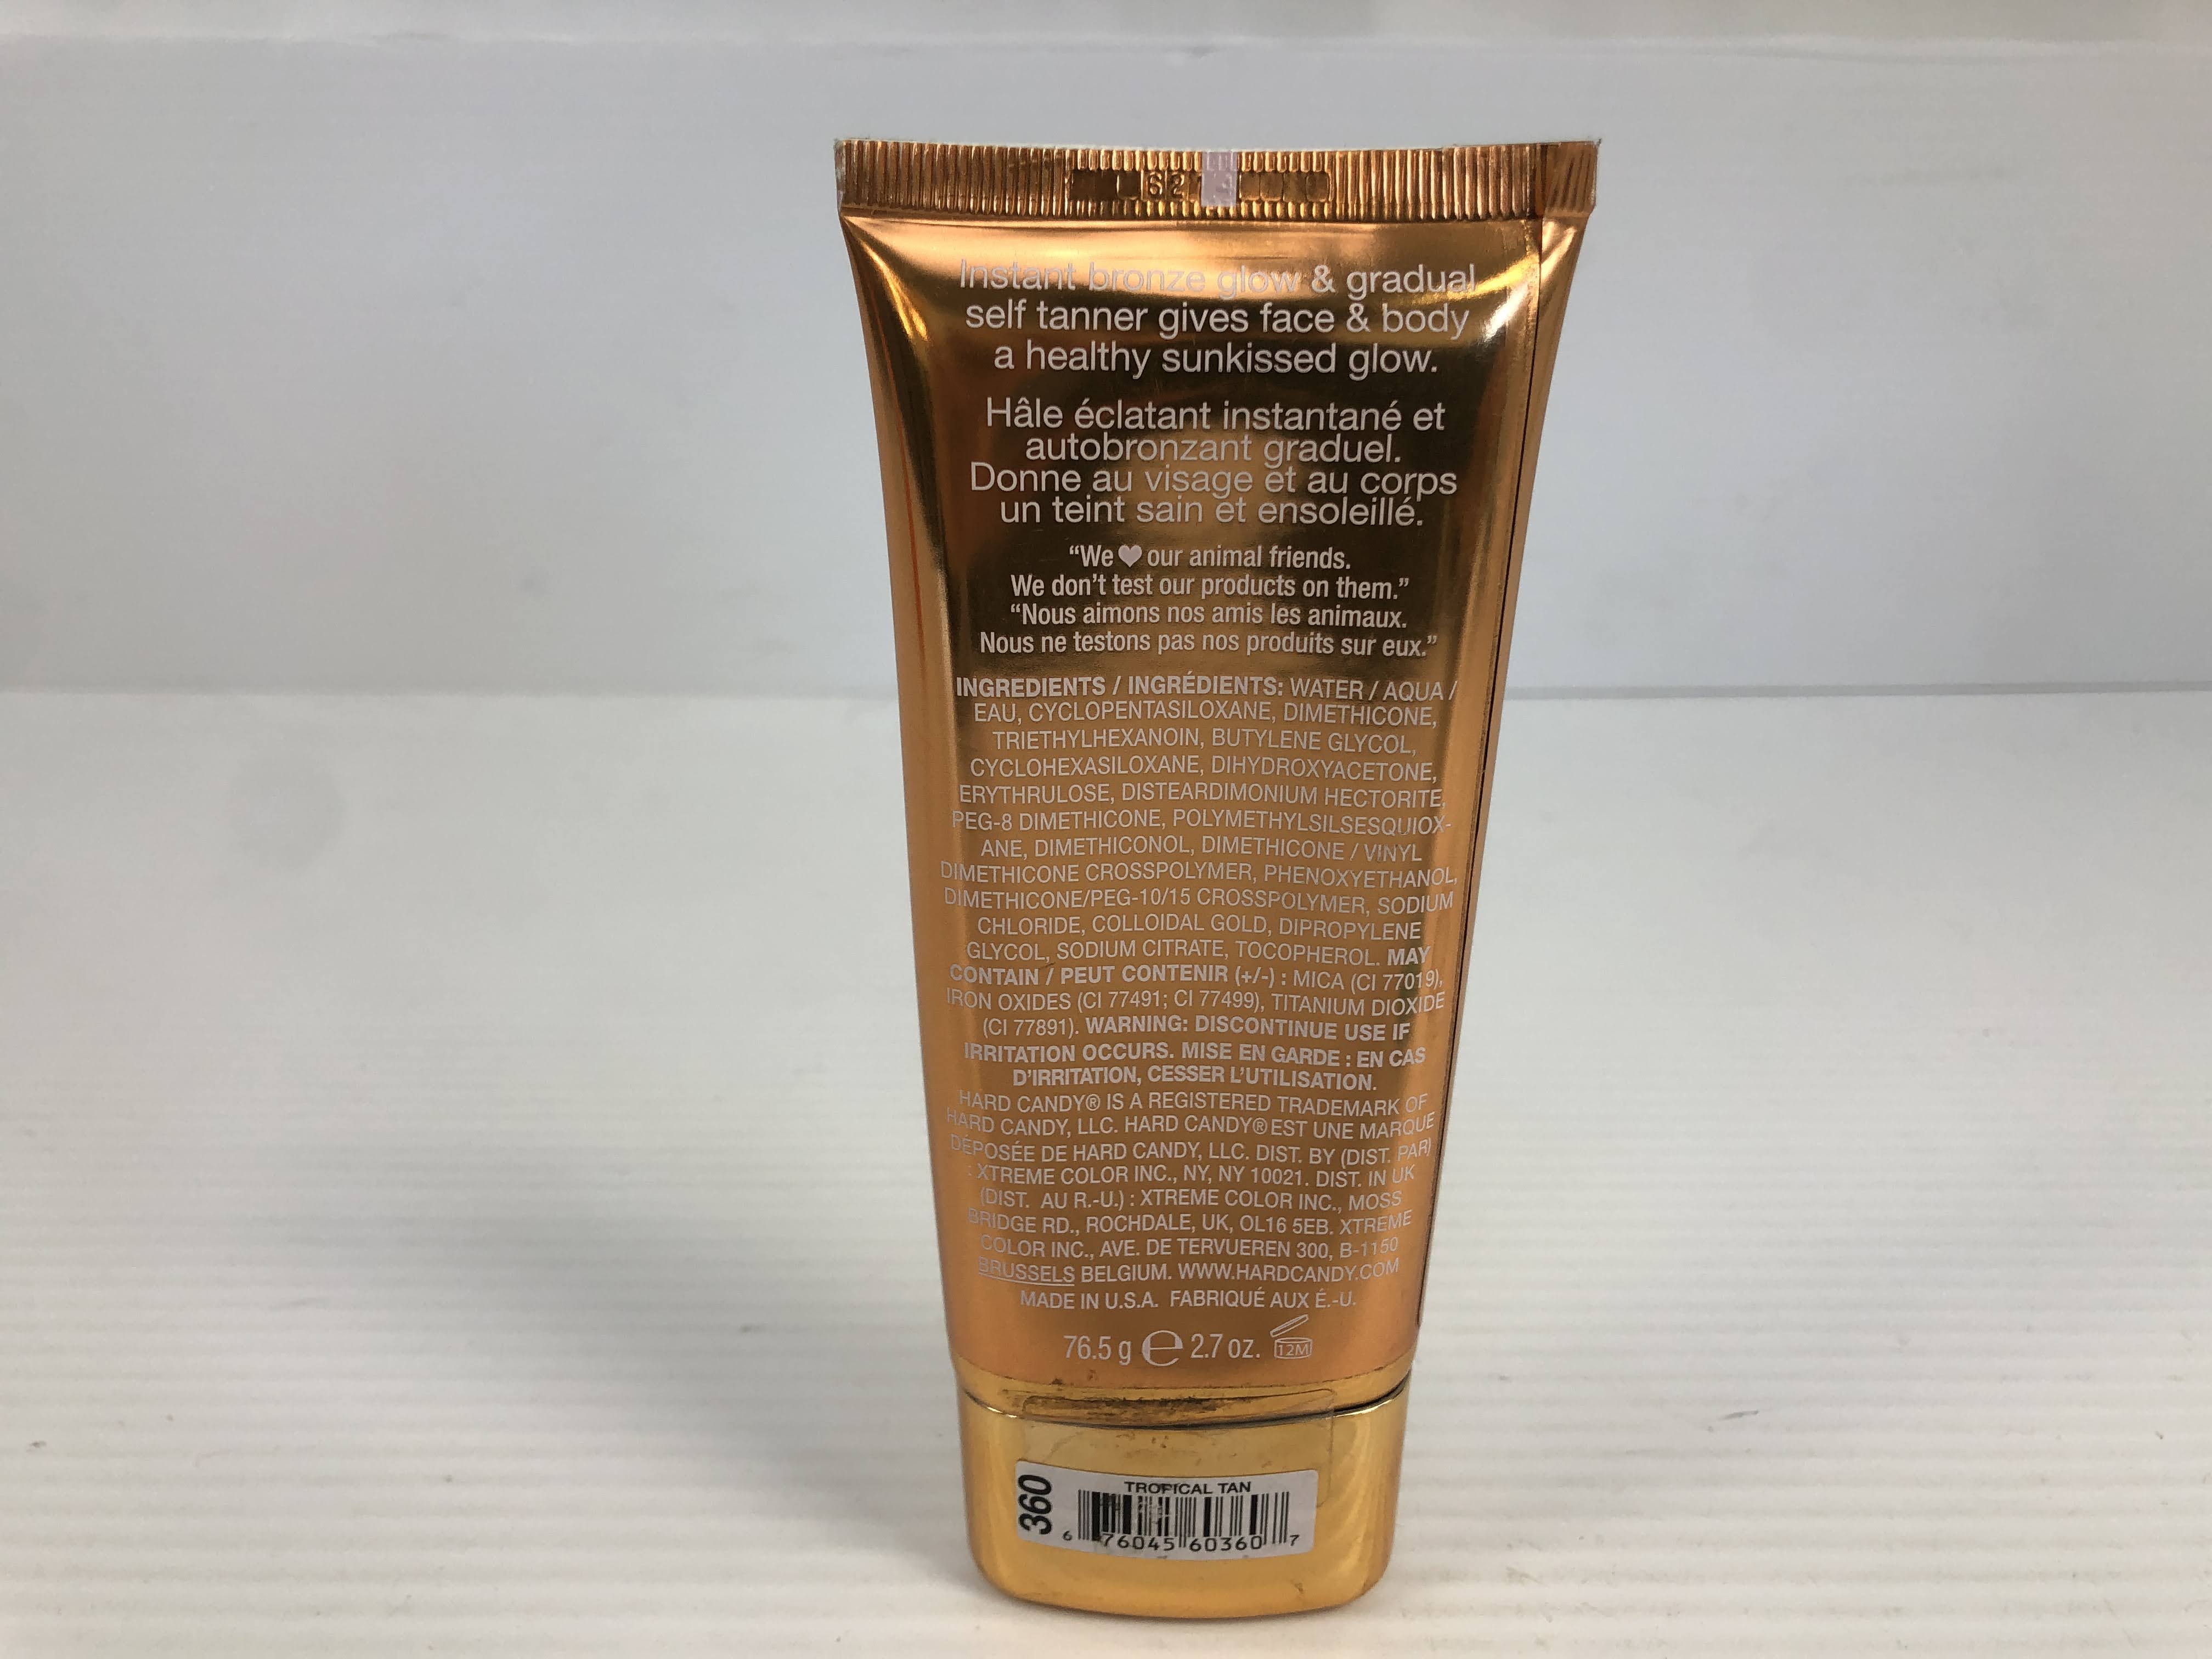 Hard Candy All Over Face and Body 24K Gold Cream, 0360 Luminizer, 0.28 oz - image 2 of 2